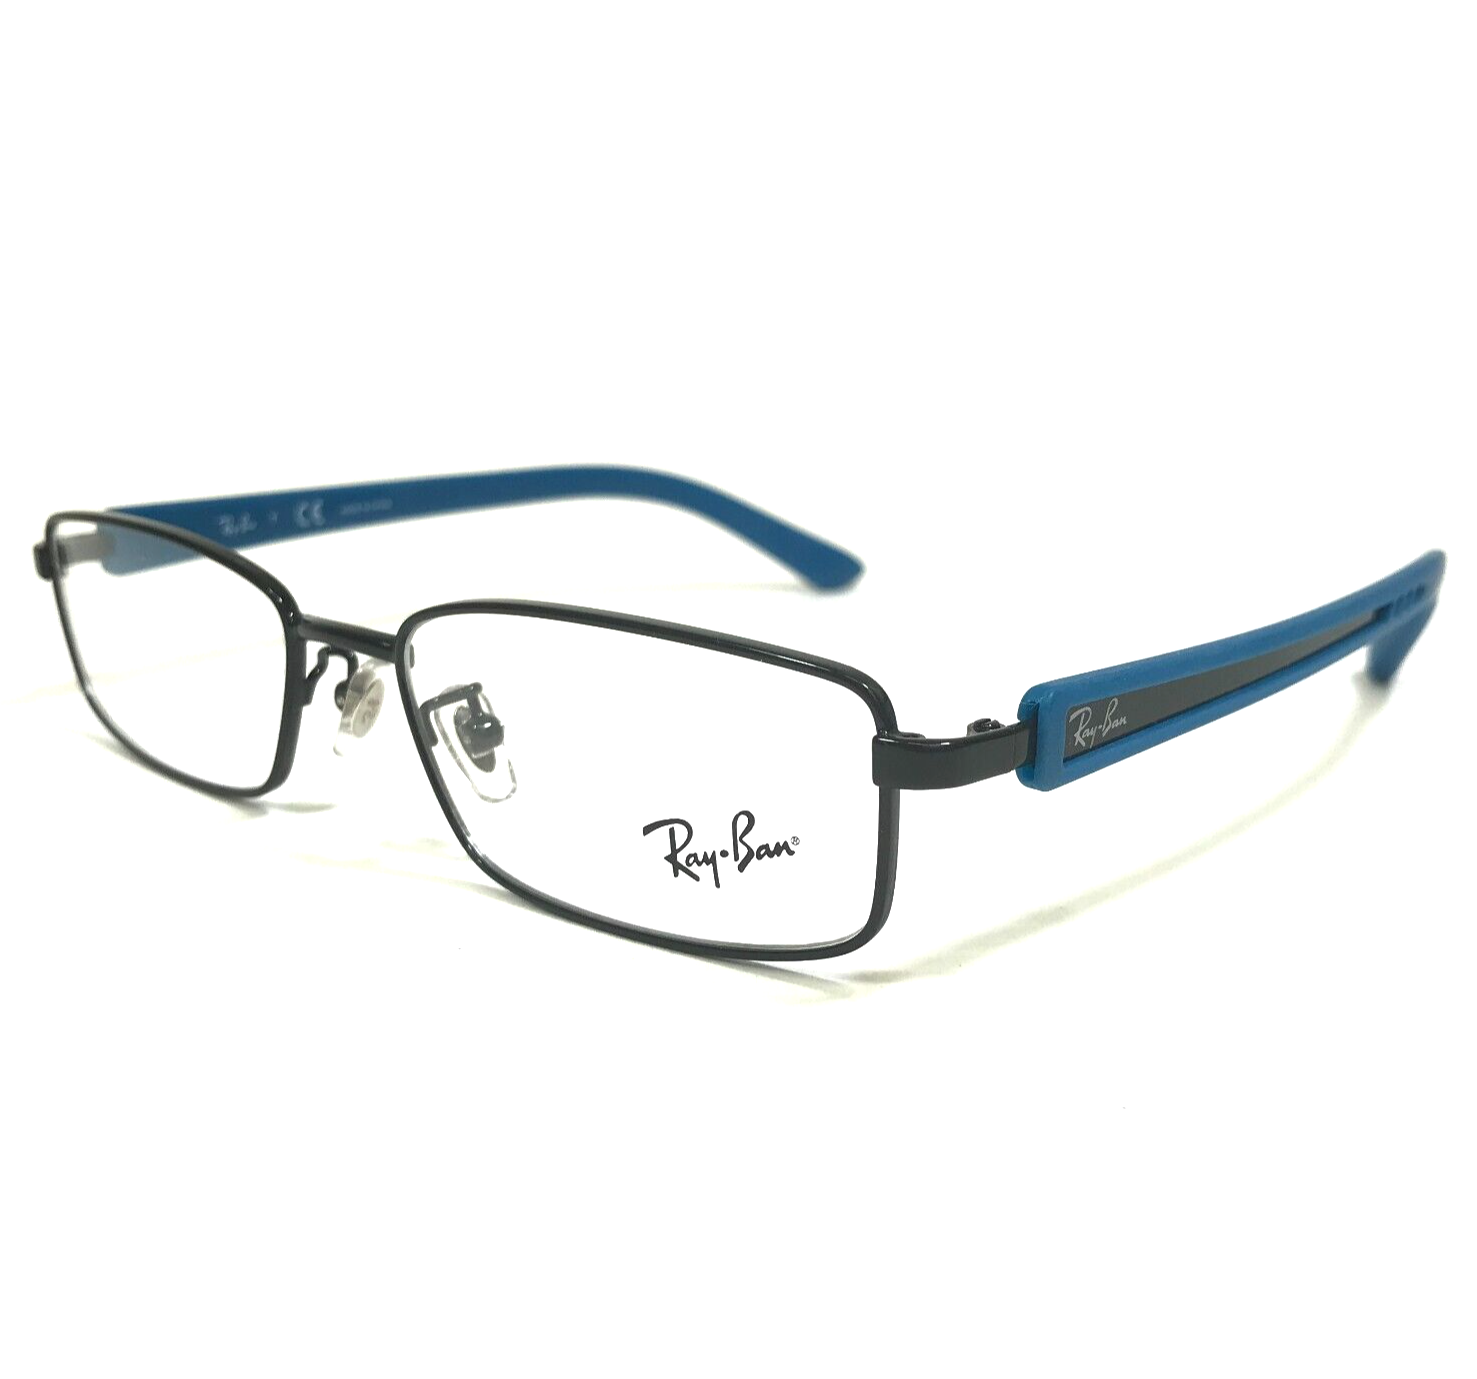 Primary image for Ray-Ban Eyeglasses Frames RB6217F 2509 Polished Black Rubberized Blue 52-17-140